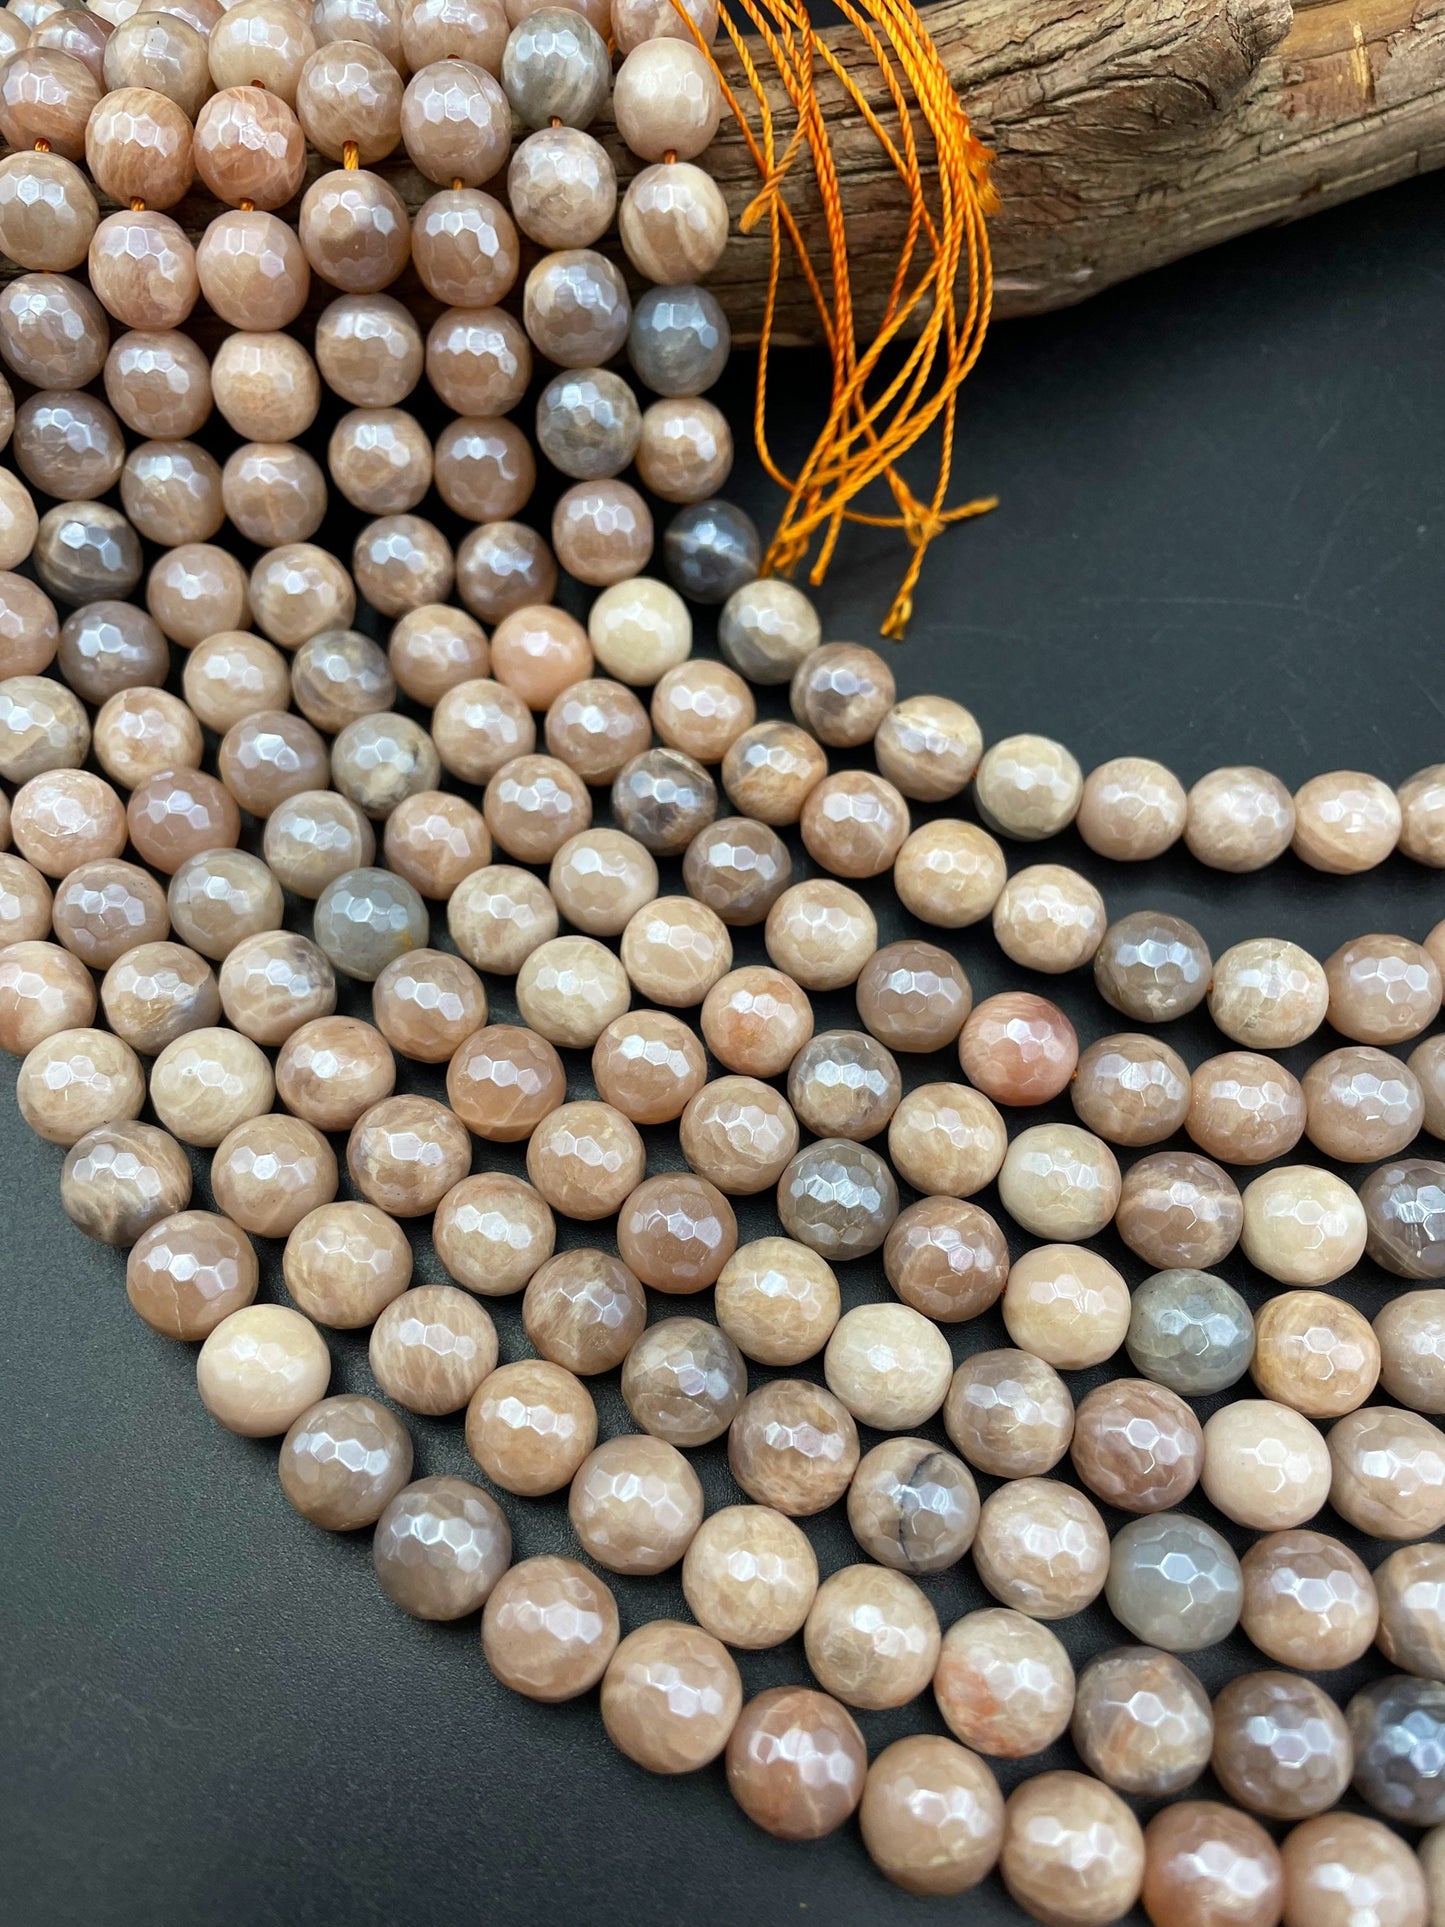 AAA Mystic Natural Sunstone Bead - Faceted 6mm 8mm 10mm 12mm Round Bead - Gorgeous Natural Creamy Brown Color Sunstone - High Quality